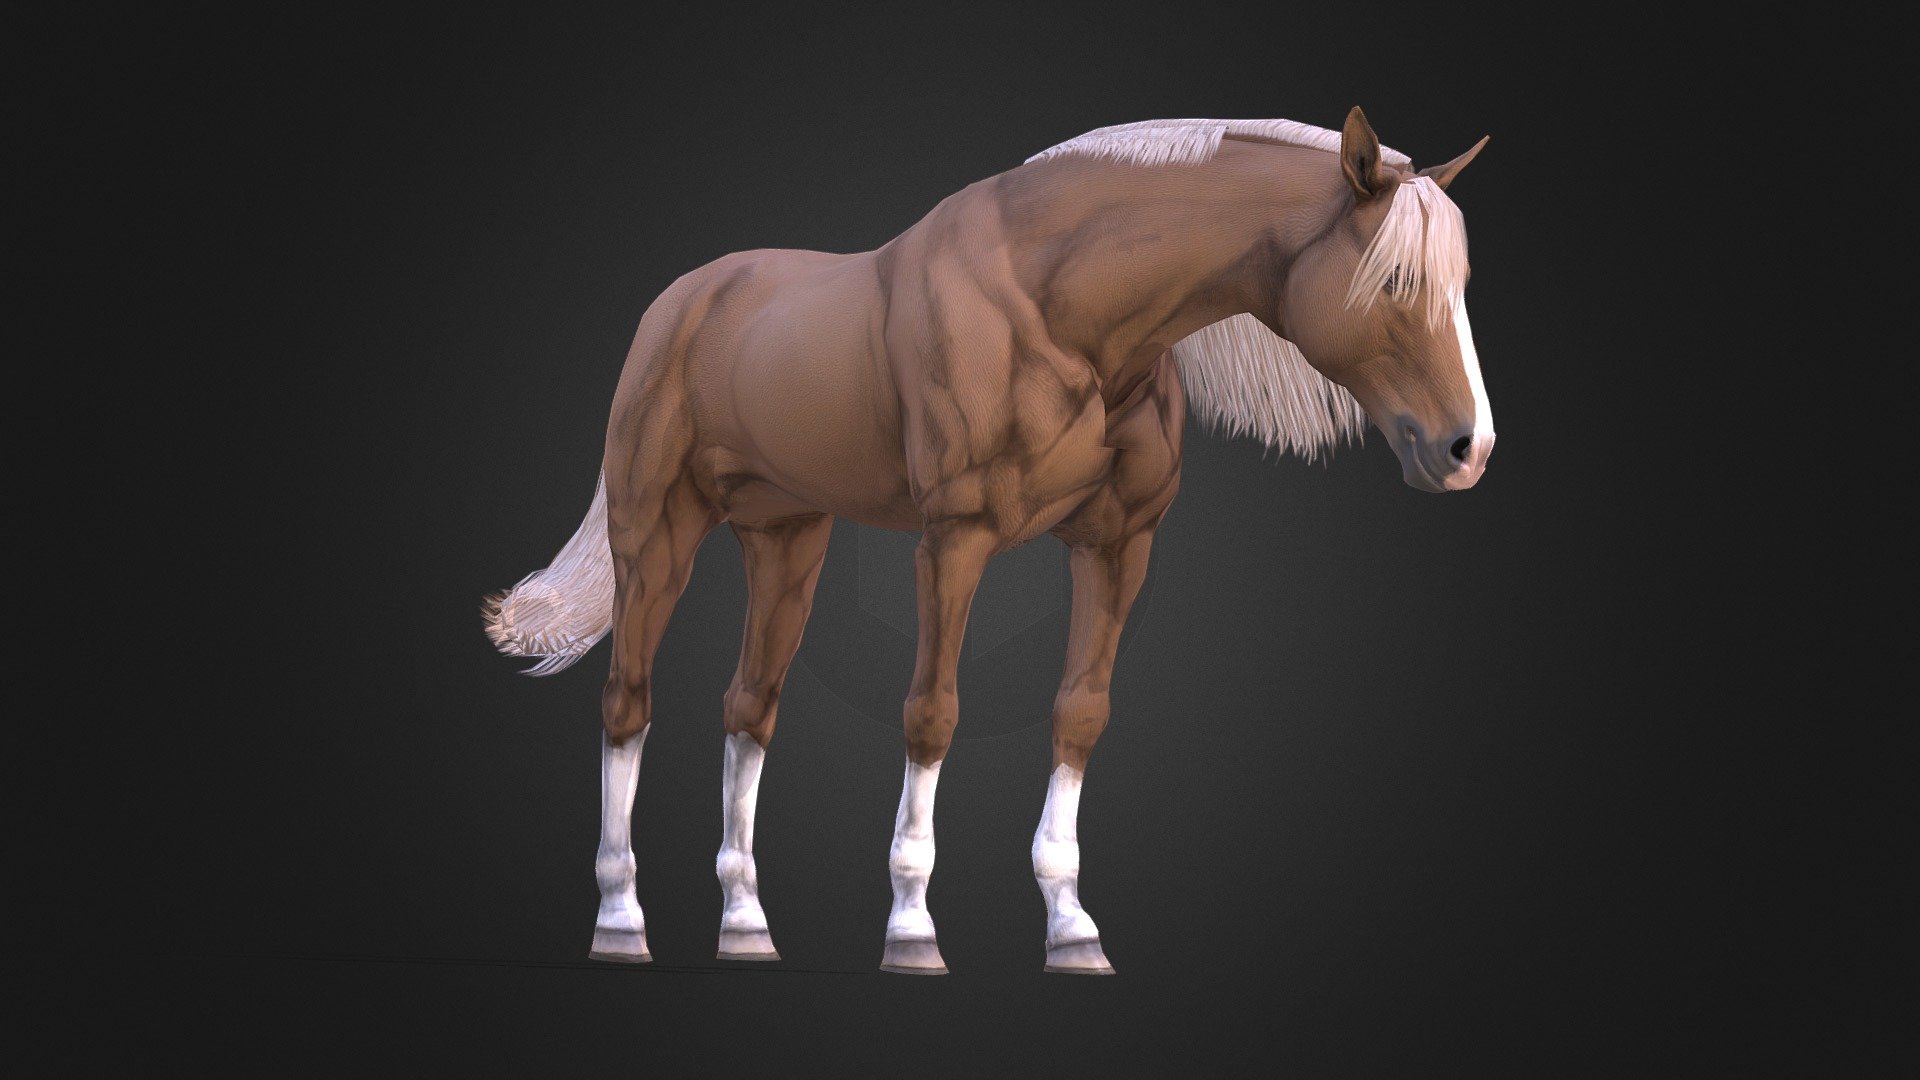 Game ready and rigged low(ish) poly horse. 100% hand painted.

Made with blender, ps and substance painter - Horse - 3D model by trsdz 3d model